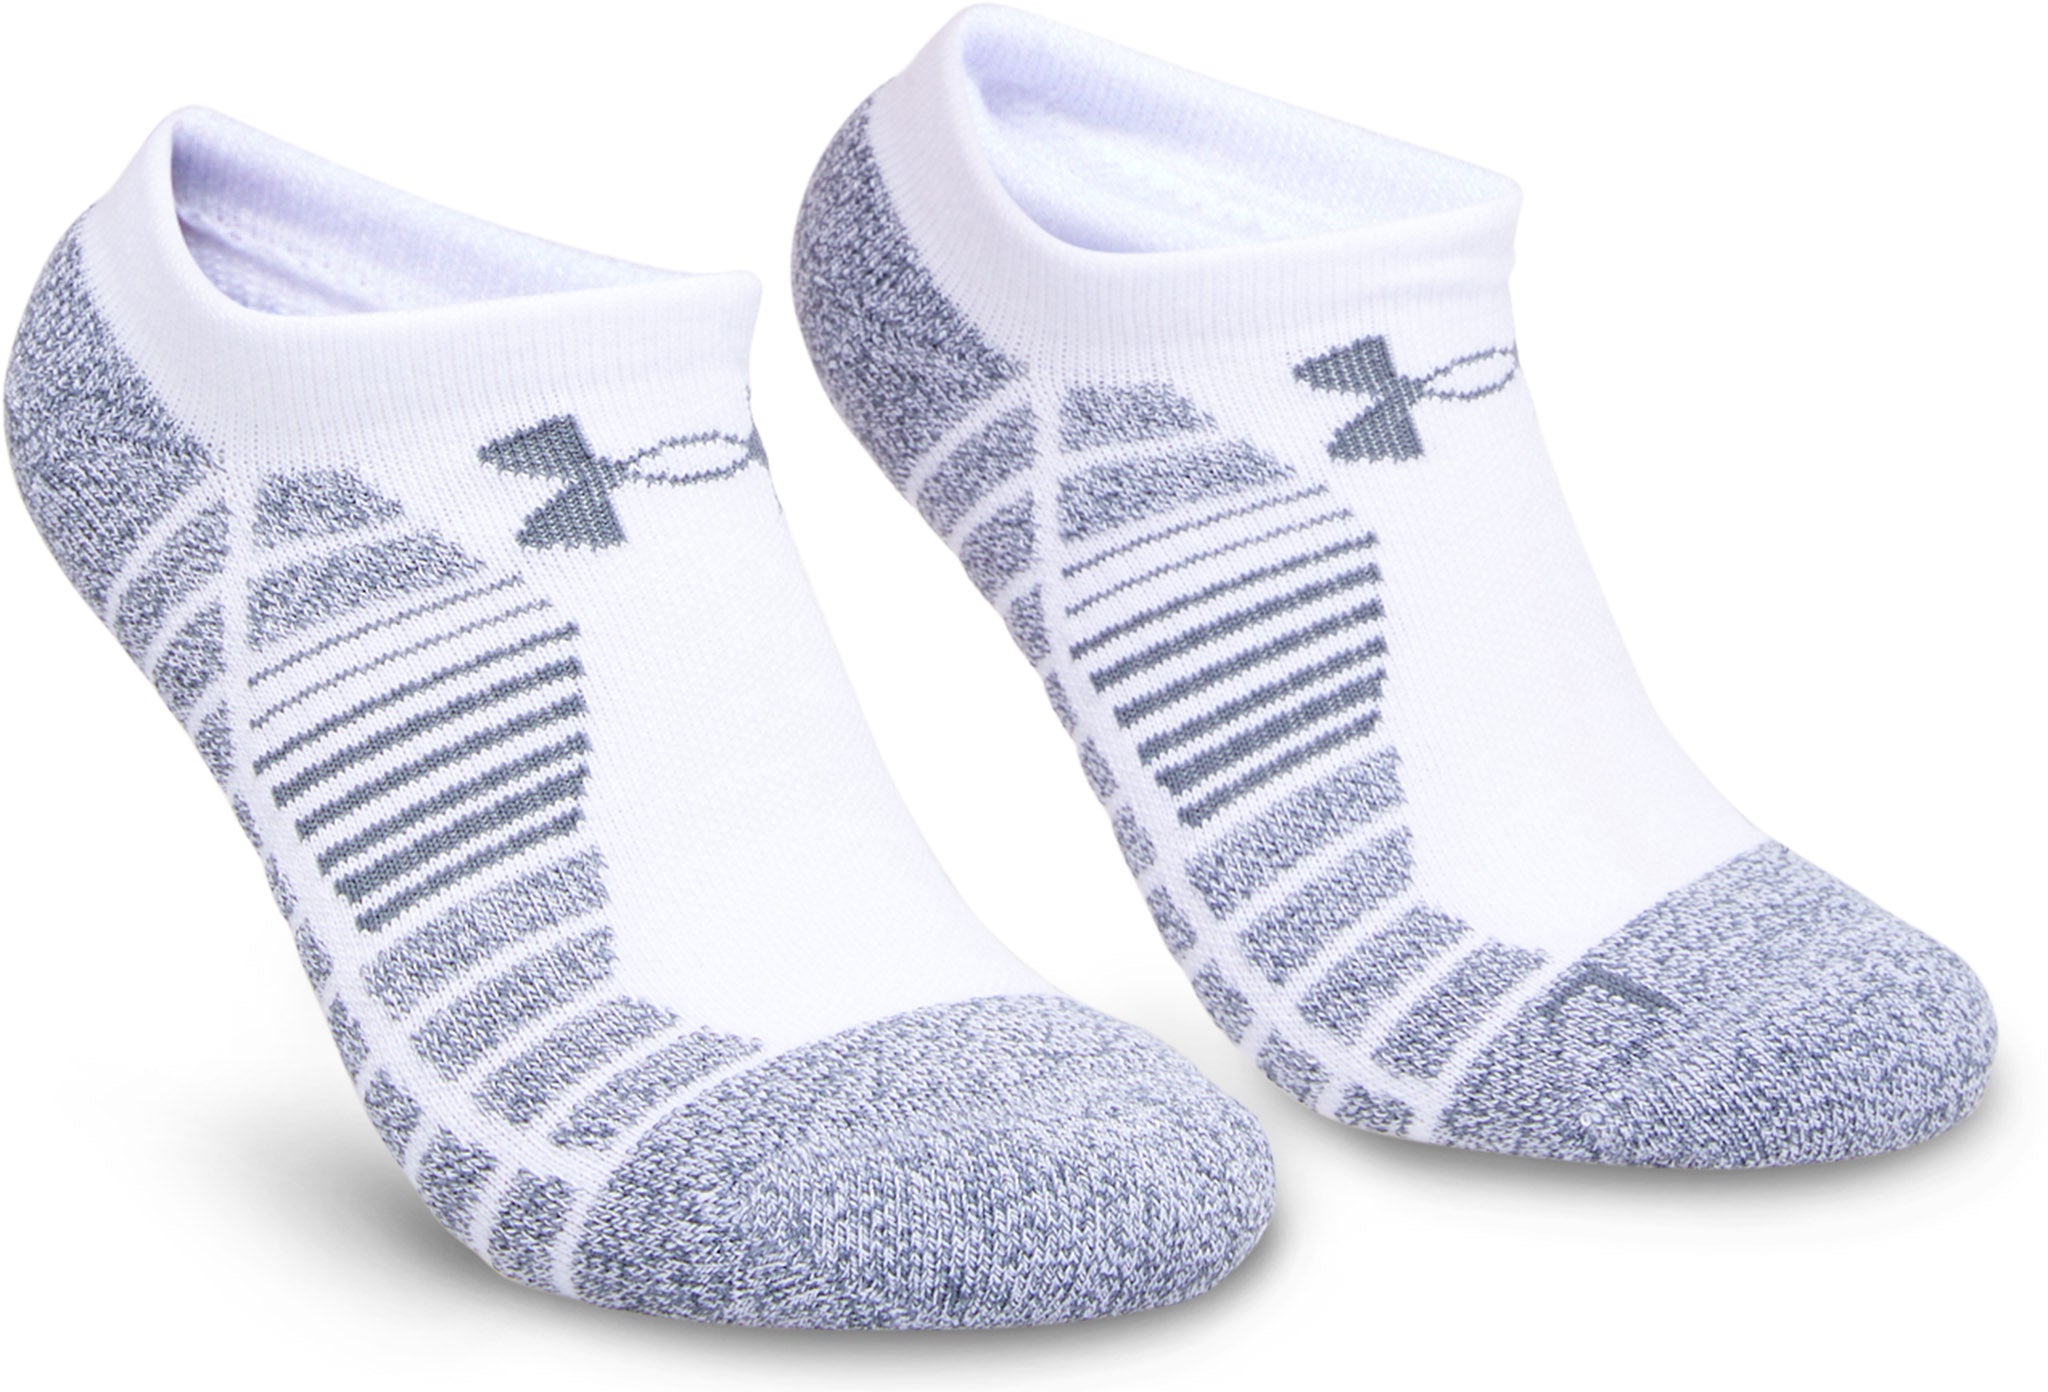 Under Armour Elevated Performance No Show Socks 3 Pack - Unisex